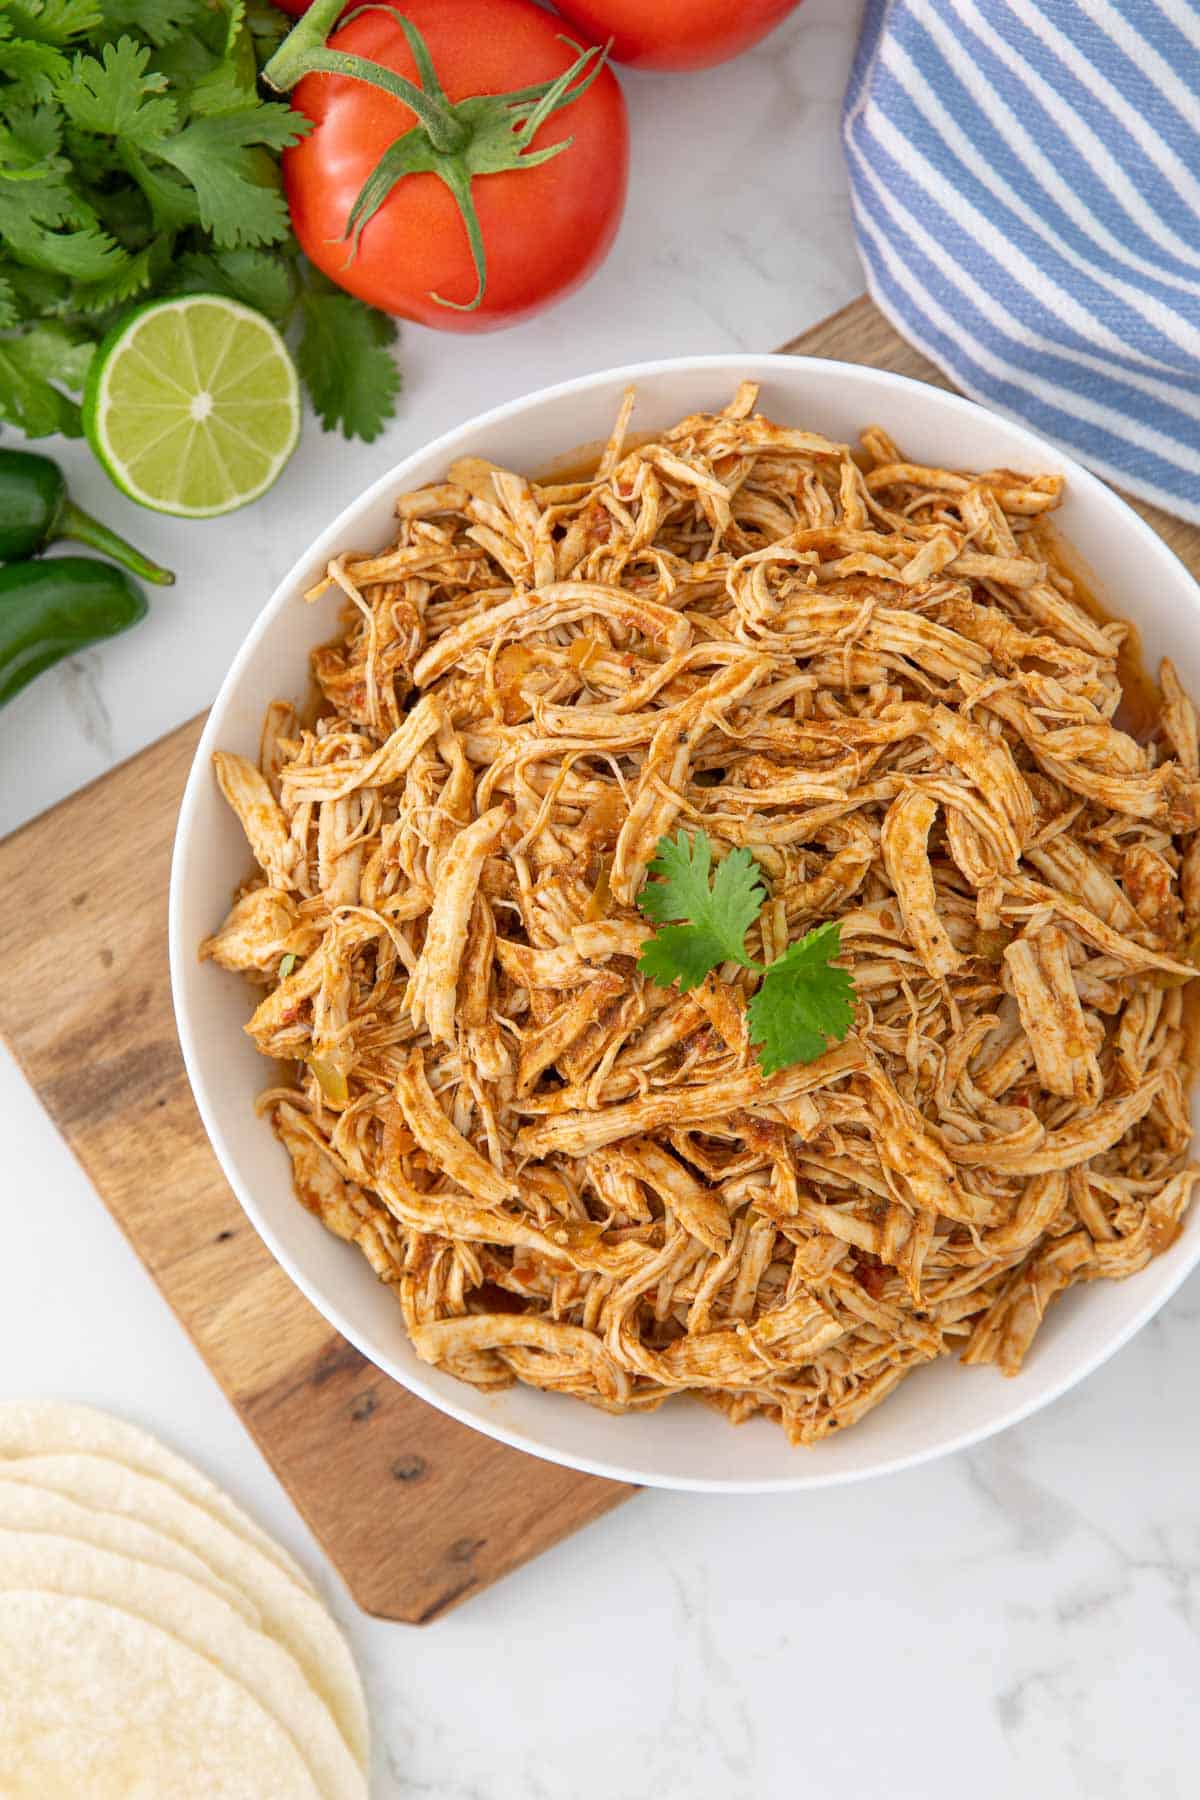 Overhead view of instant pot Mexican shredded chicken in a white serving bowl by a blue striped kitchen towel.